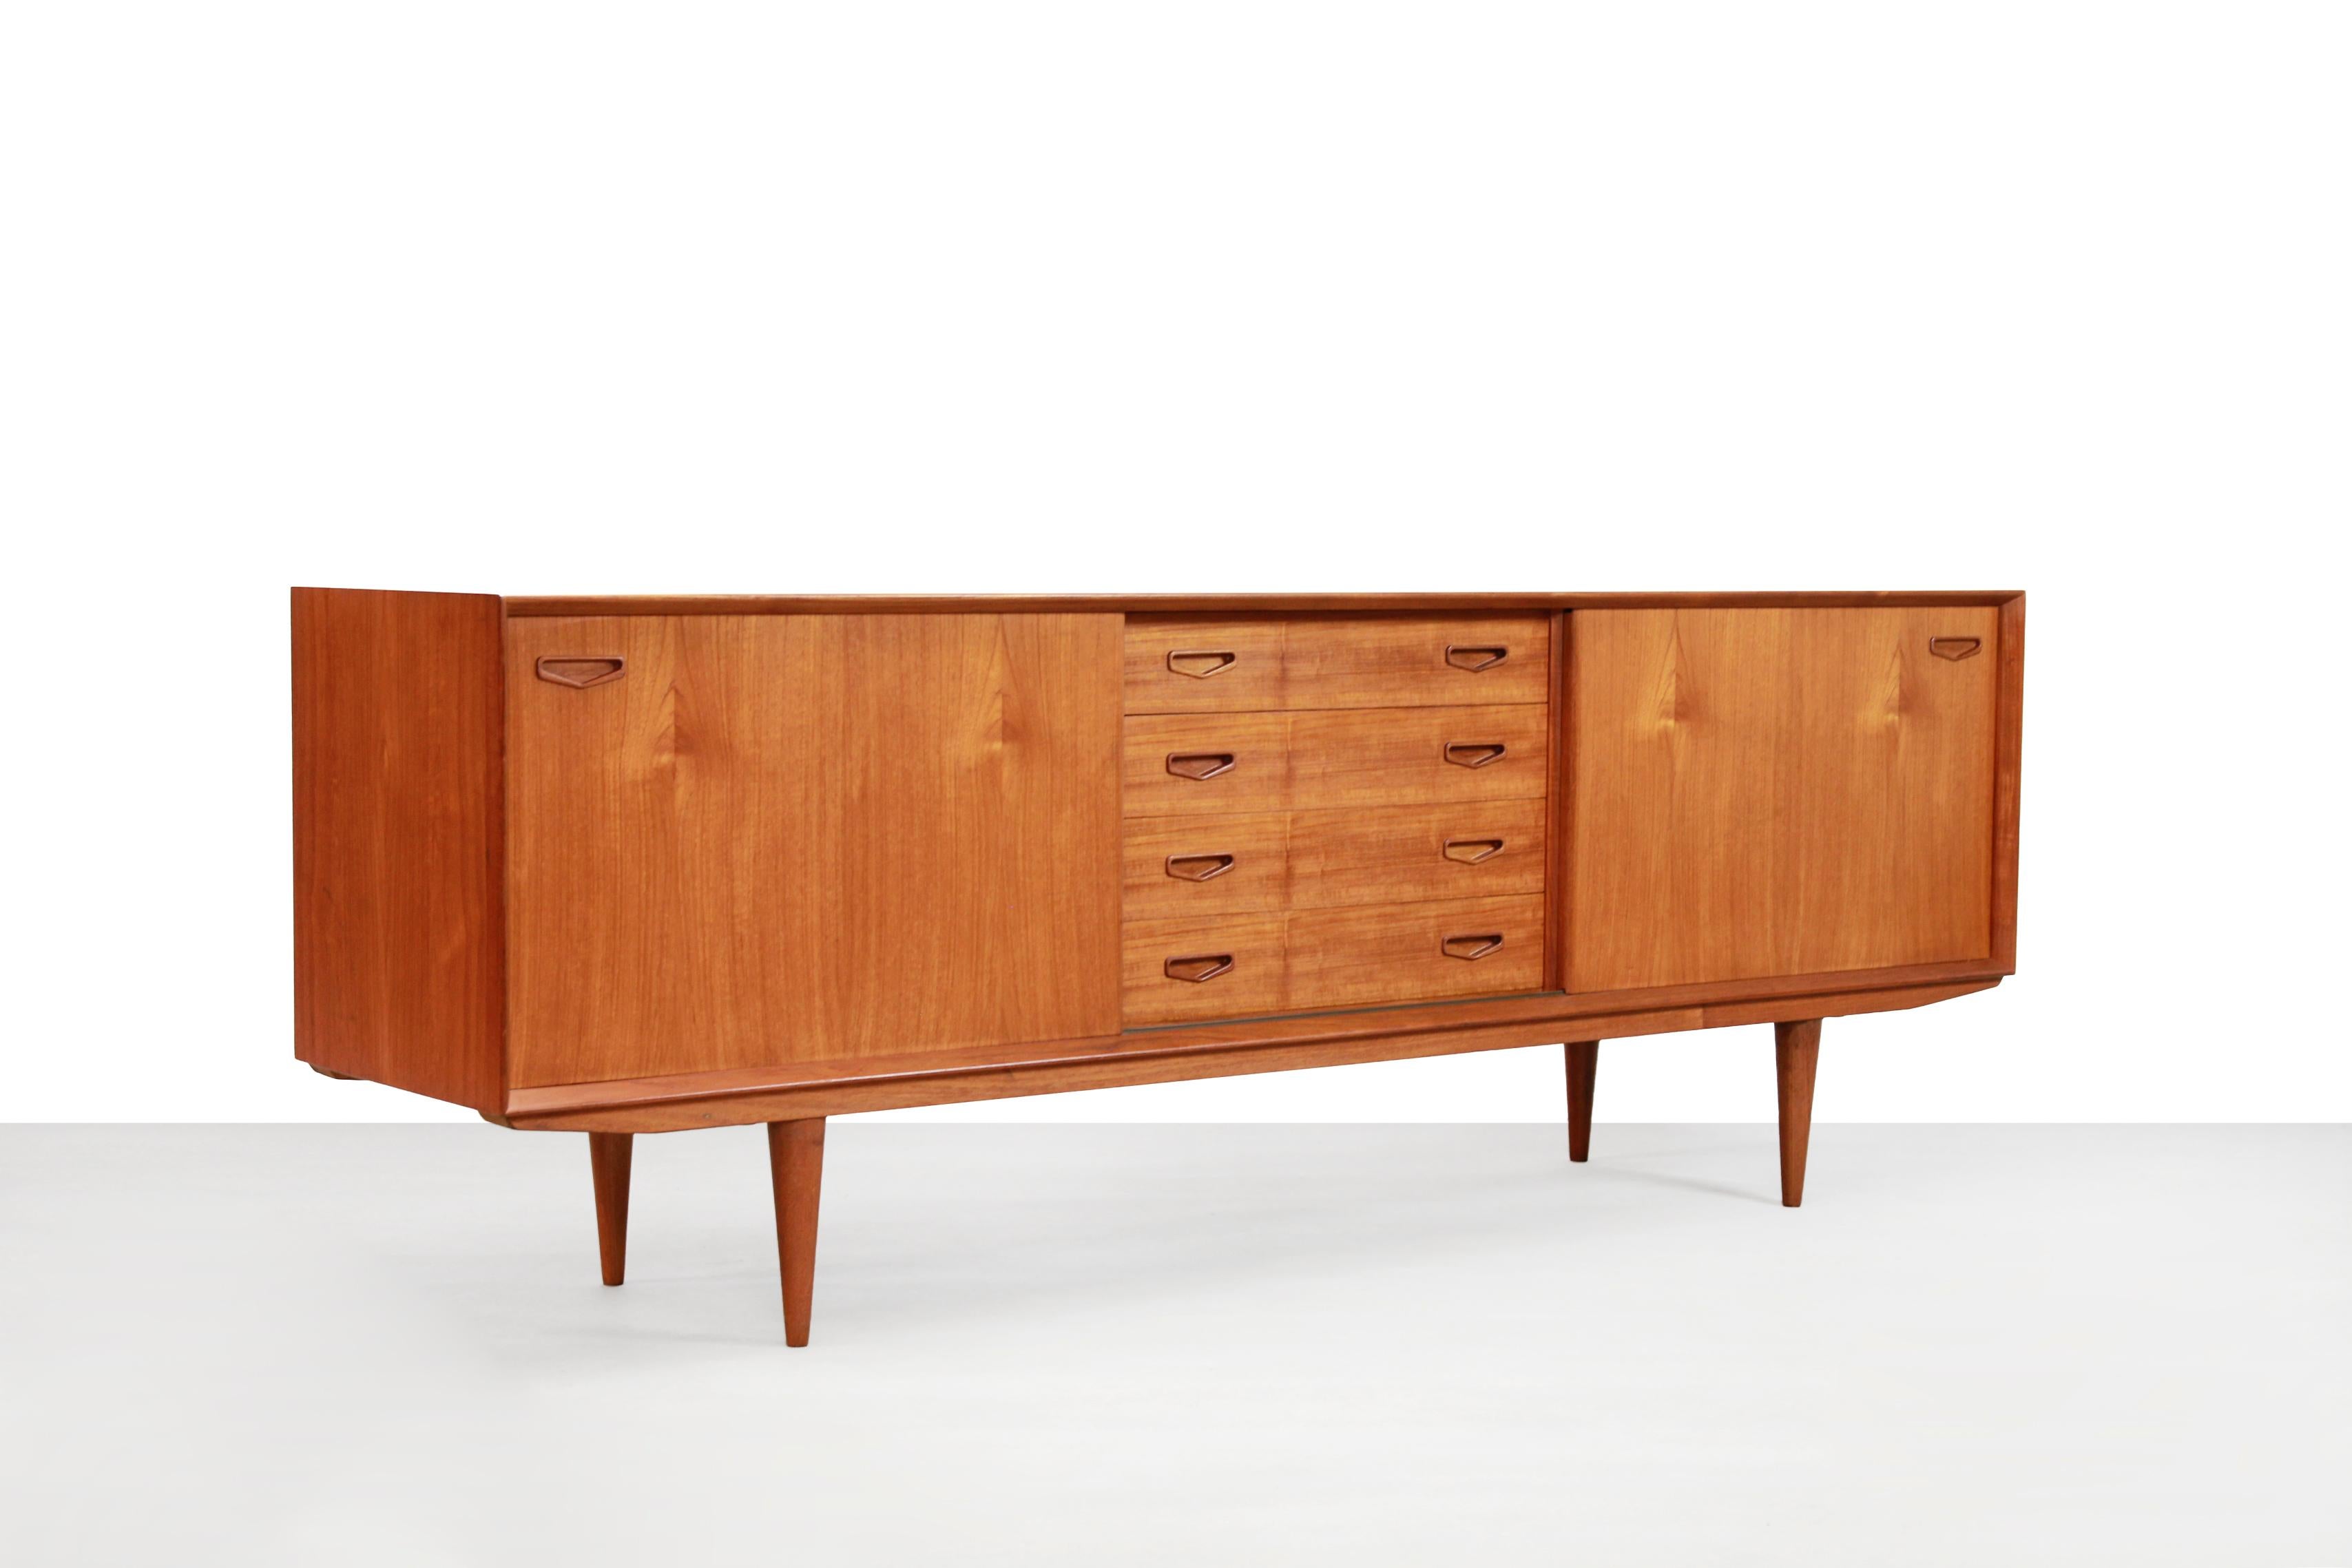 20th Century Danish Modern Design Sideboard Credenza from Clausen and Son in Teak, 1960s